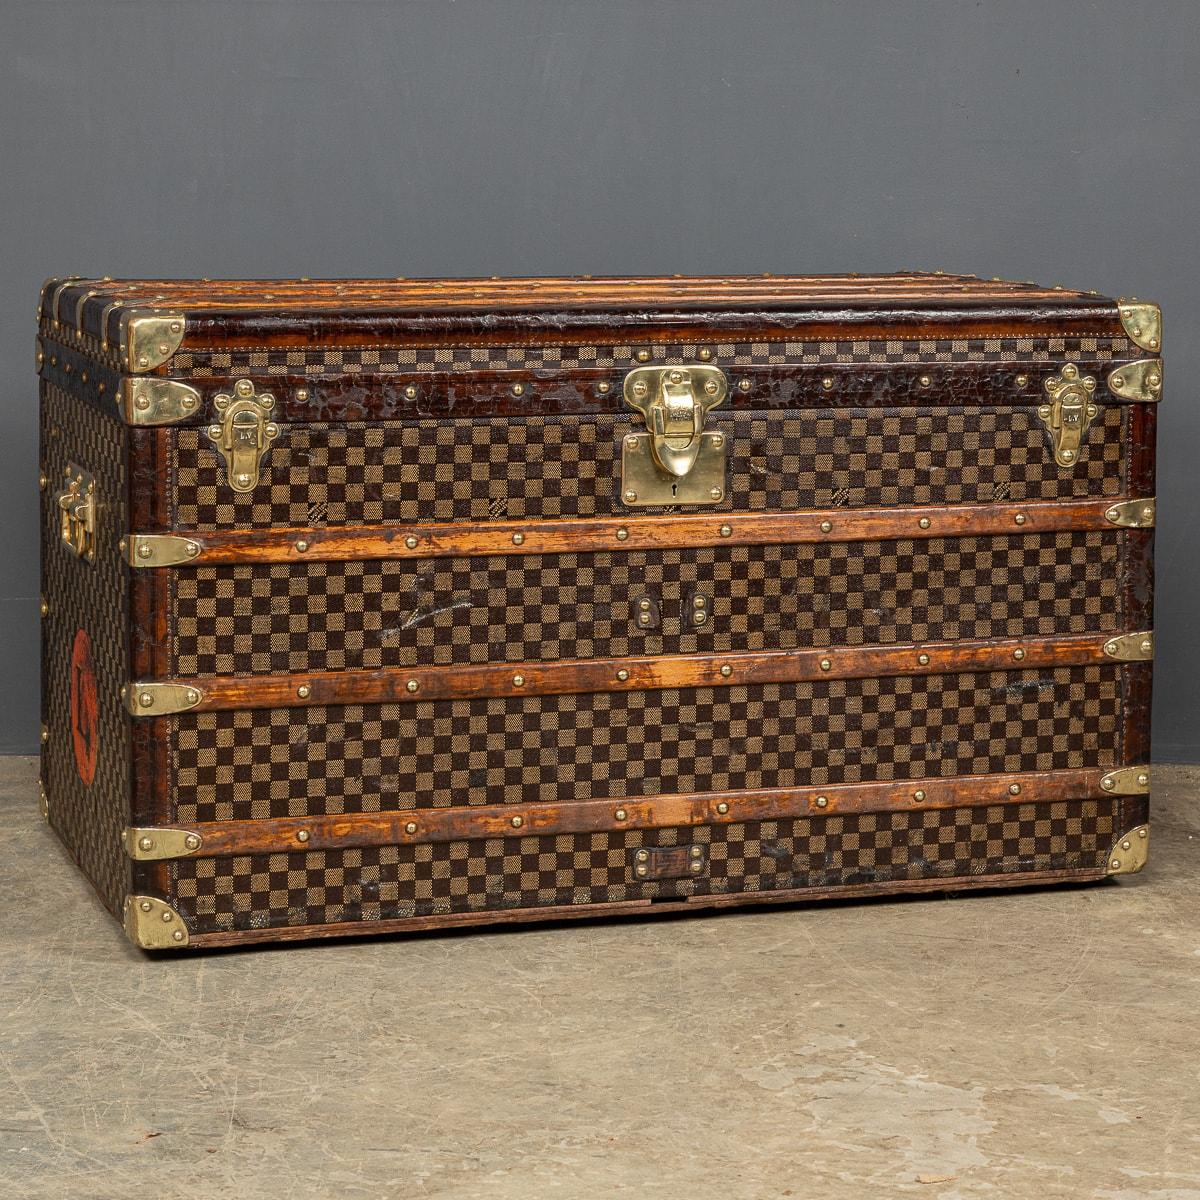 One of the rarest Louis Vuitton trunks to be offered, this trunk is covered in the world famous damier (checkerboard) canvas. Dating to around 1900, it is a perfect example of such trunks. Inside has three original trays and quilted lid. Unusually